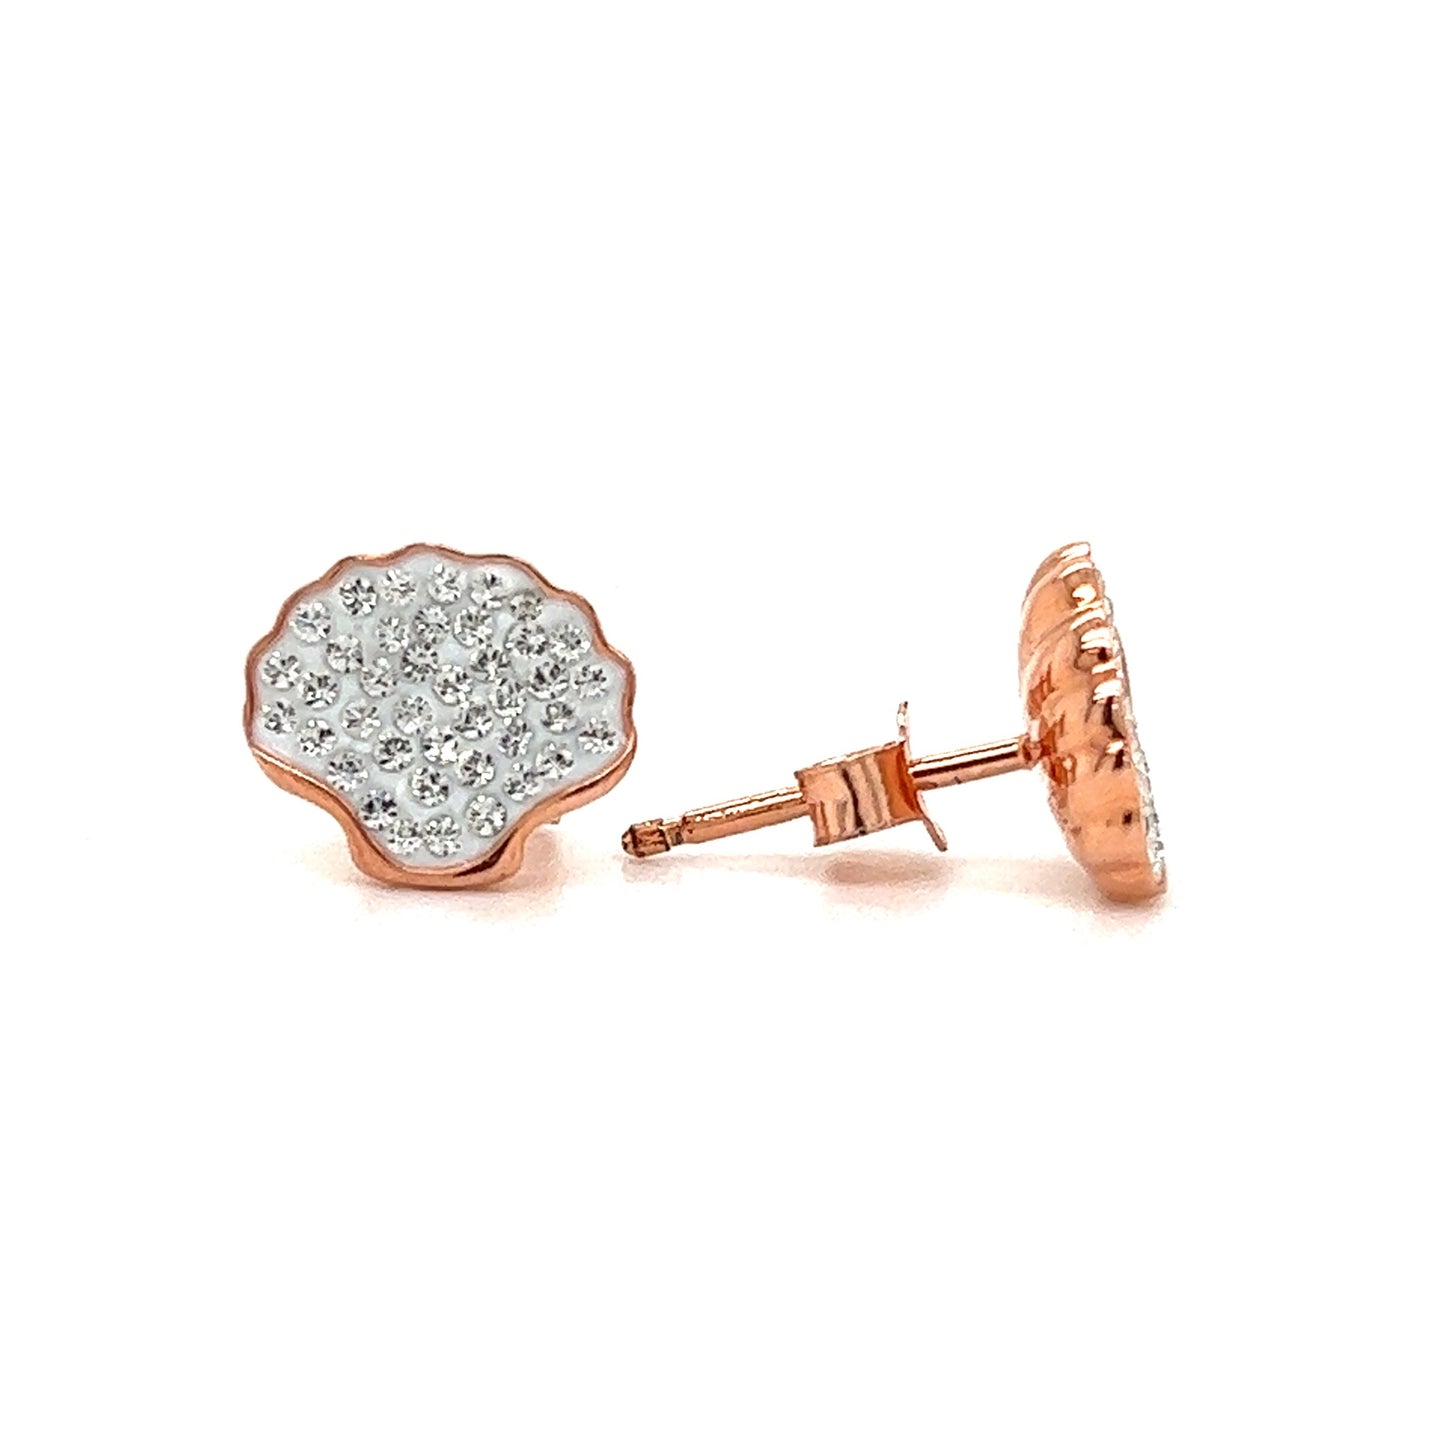 Shell Stud Earrings with White Crystals and Rose Gold Plating in Sterling Silver Front & Profile View